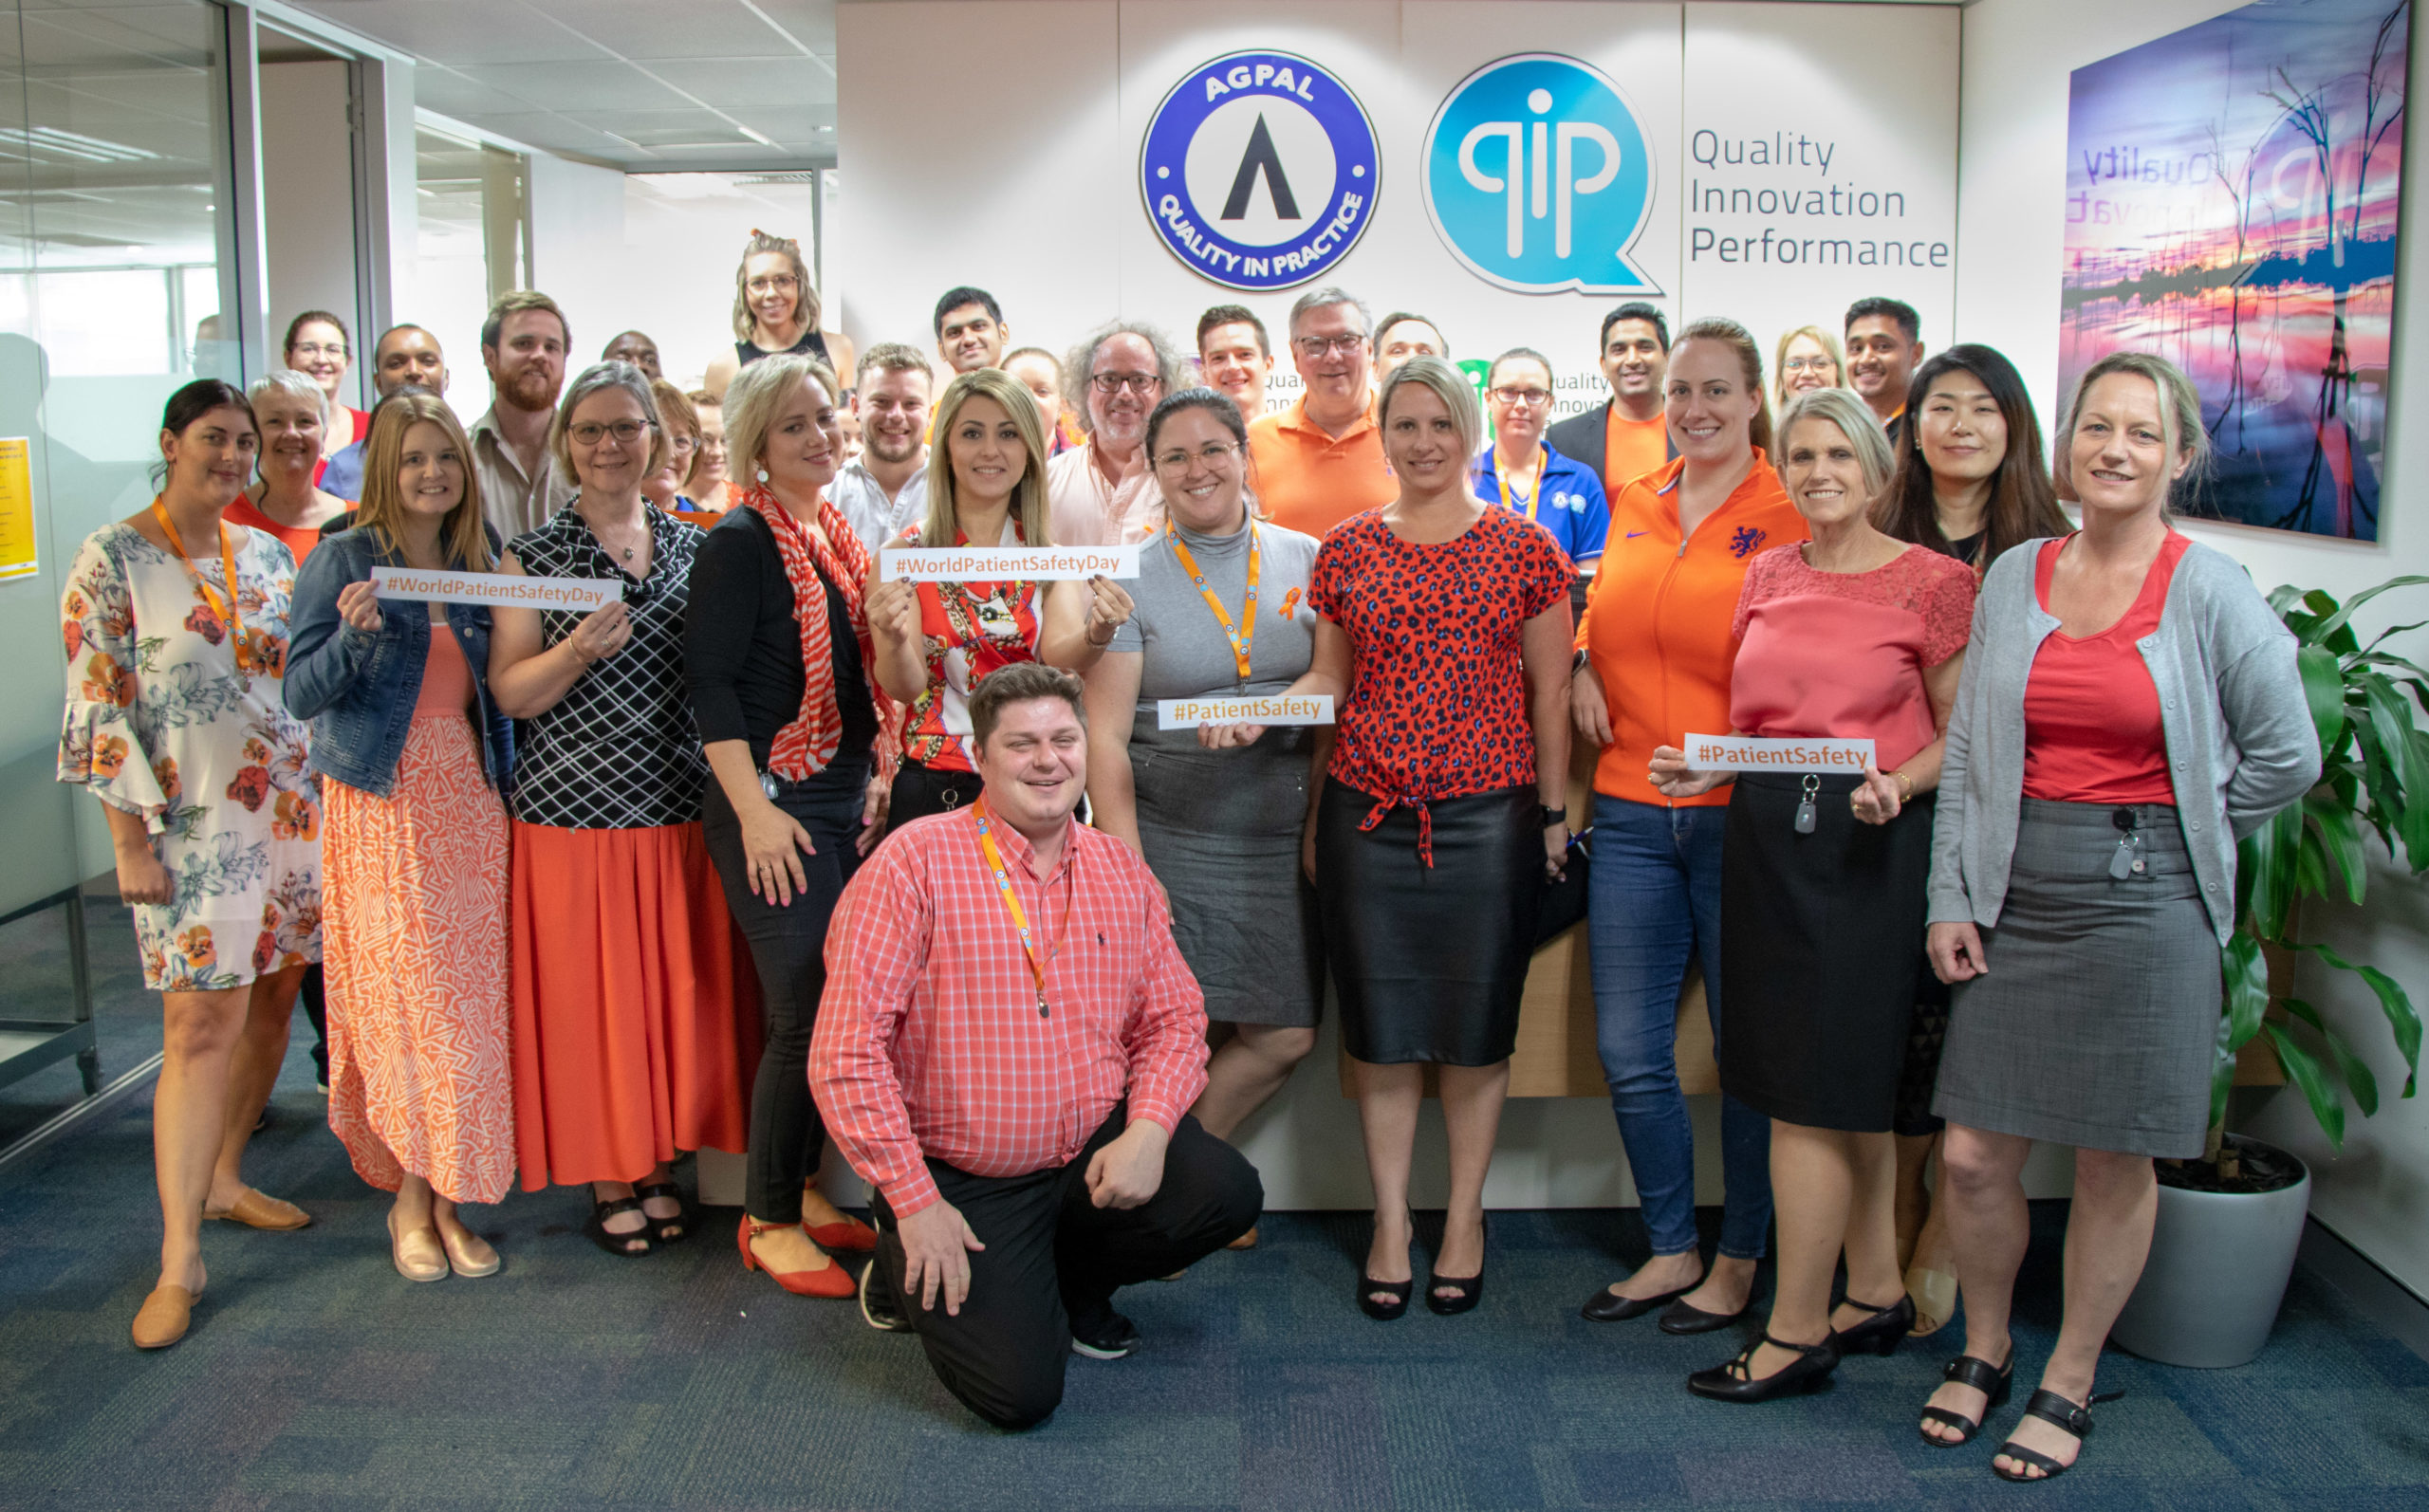 Group photo of smiling AGPAL staff dressed in orange with company logo in the background